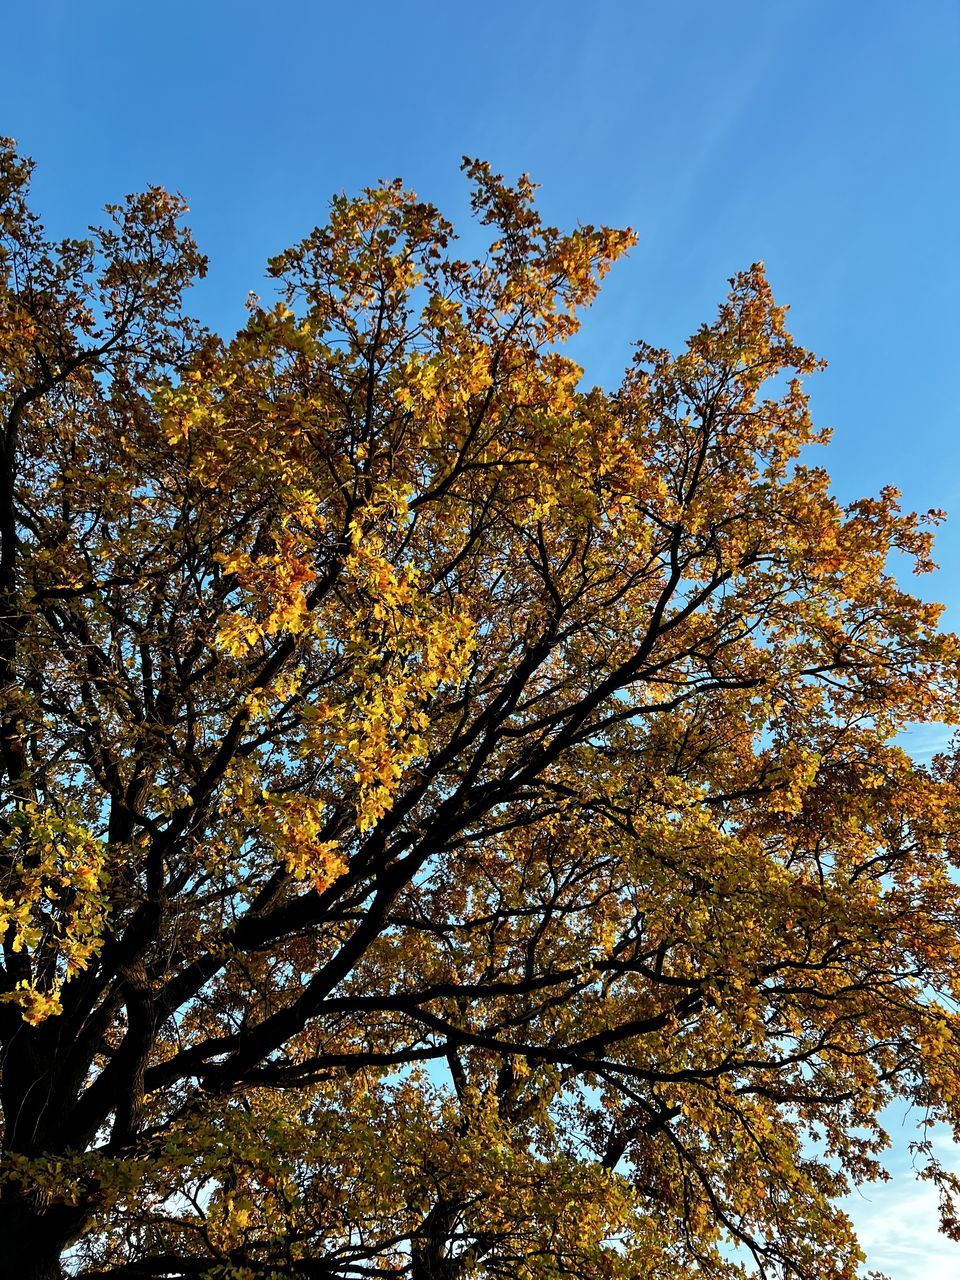 tree, plant, sky, autumn, nature, beauty in nature, low angle view, leaf, no people, branch, growth, outdoors, yellow, tranquility, plant part, day, sunlight, scenics - nature, clear sky, blue, environment, orange color, land